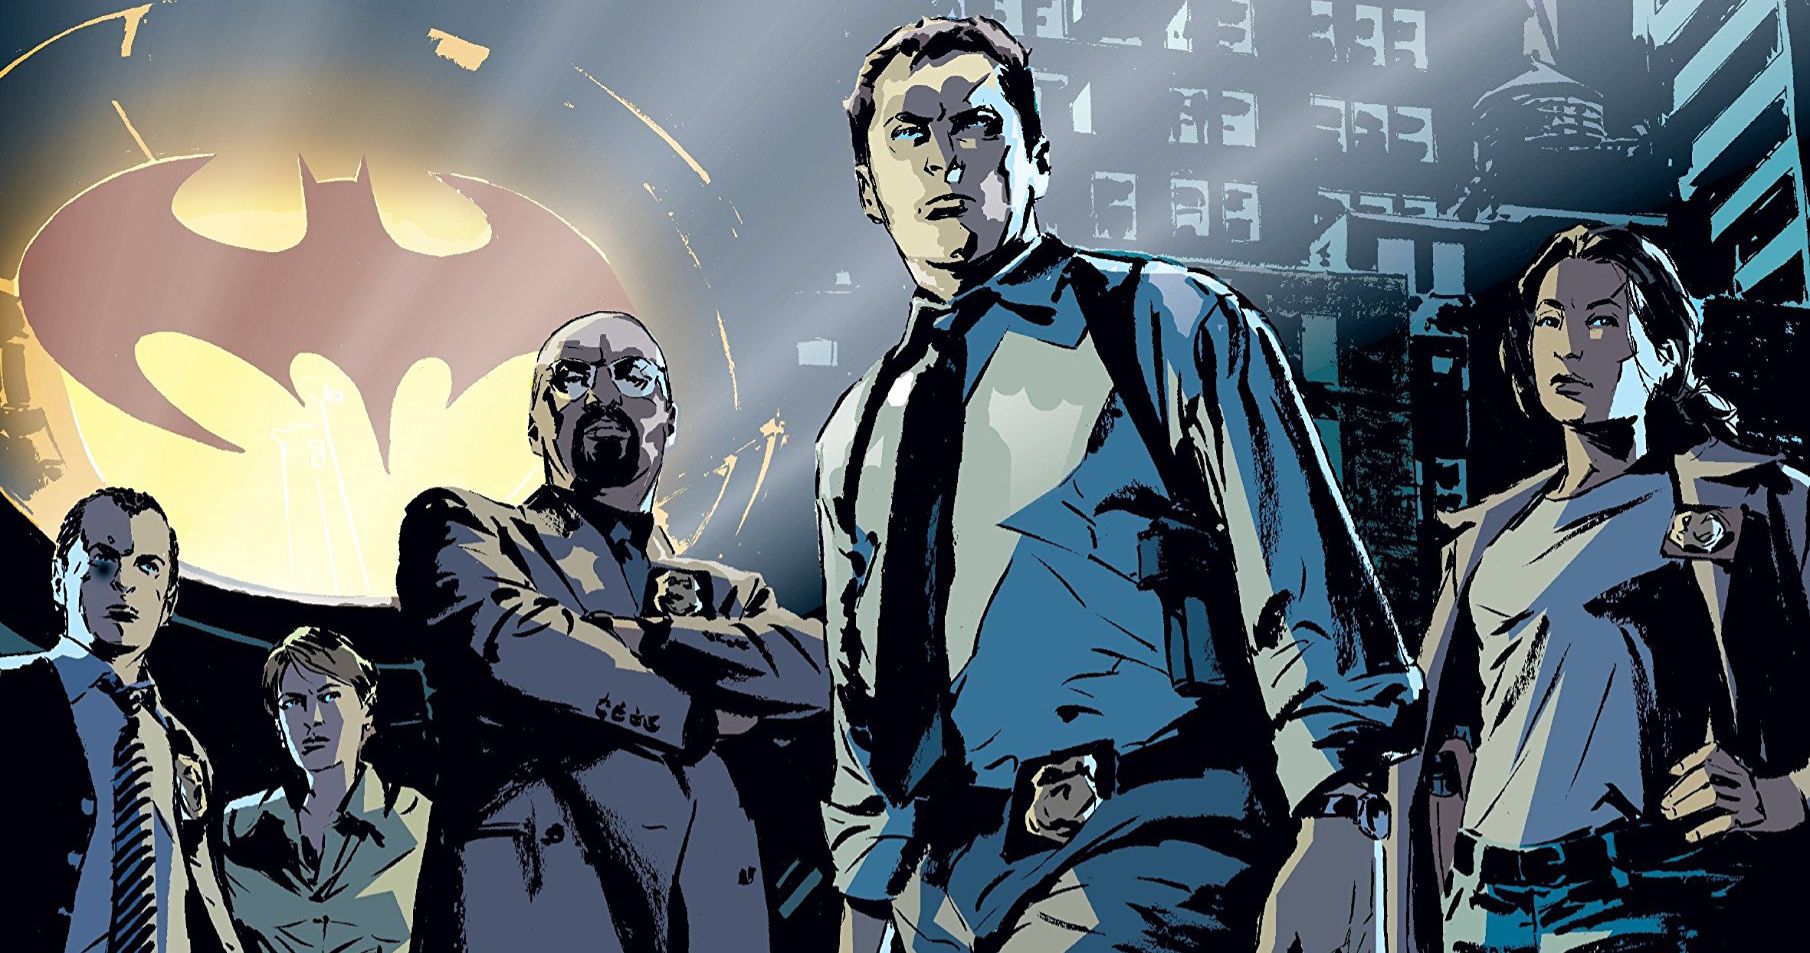 The Batman HBO Max Series Is About Jim Gordon, But It's Not a Gotham Central Adaptation